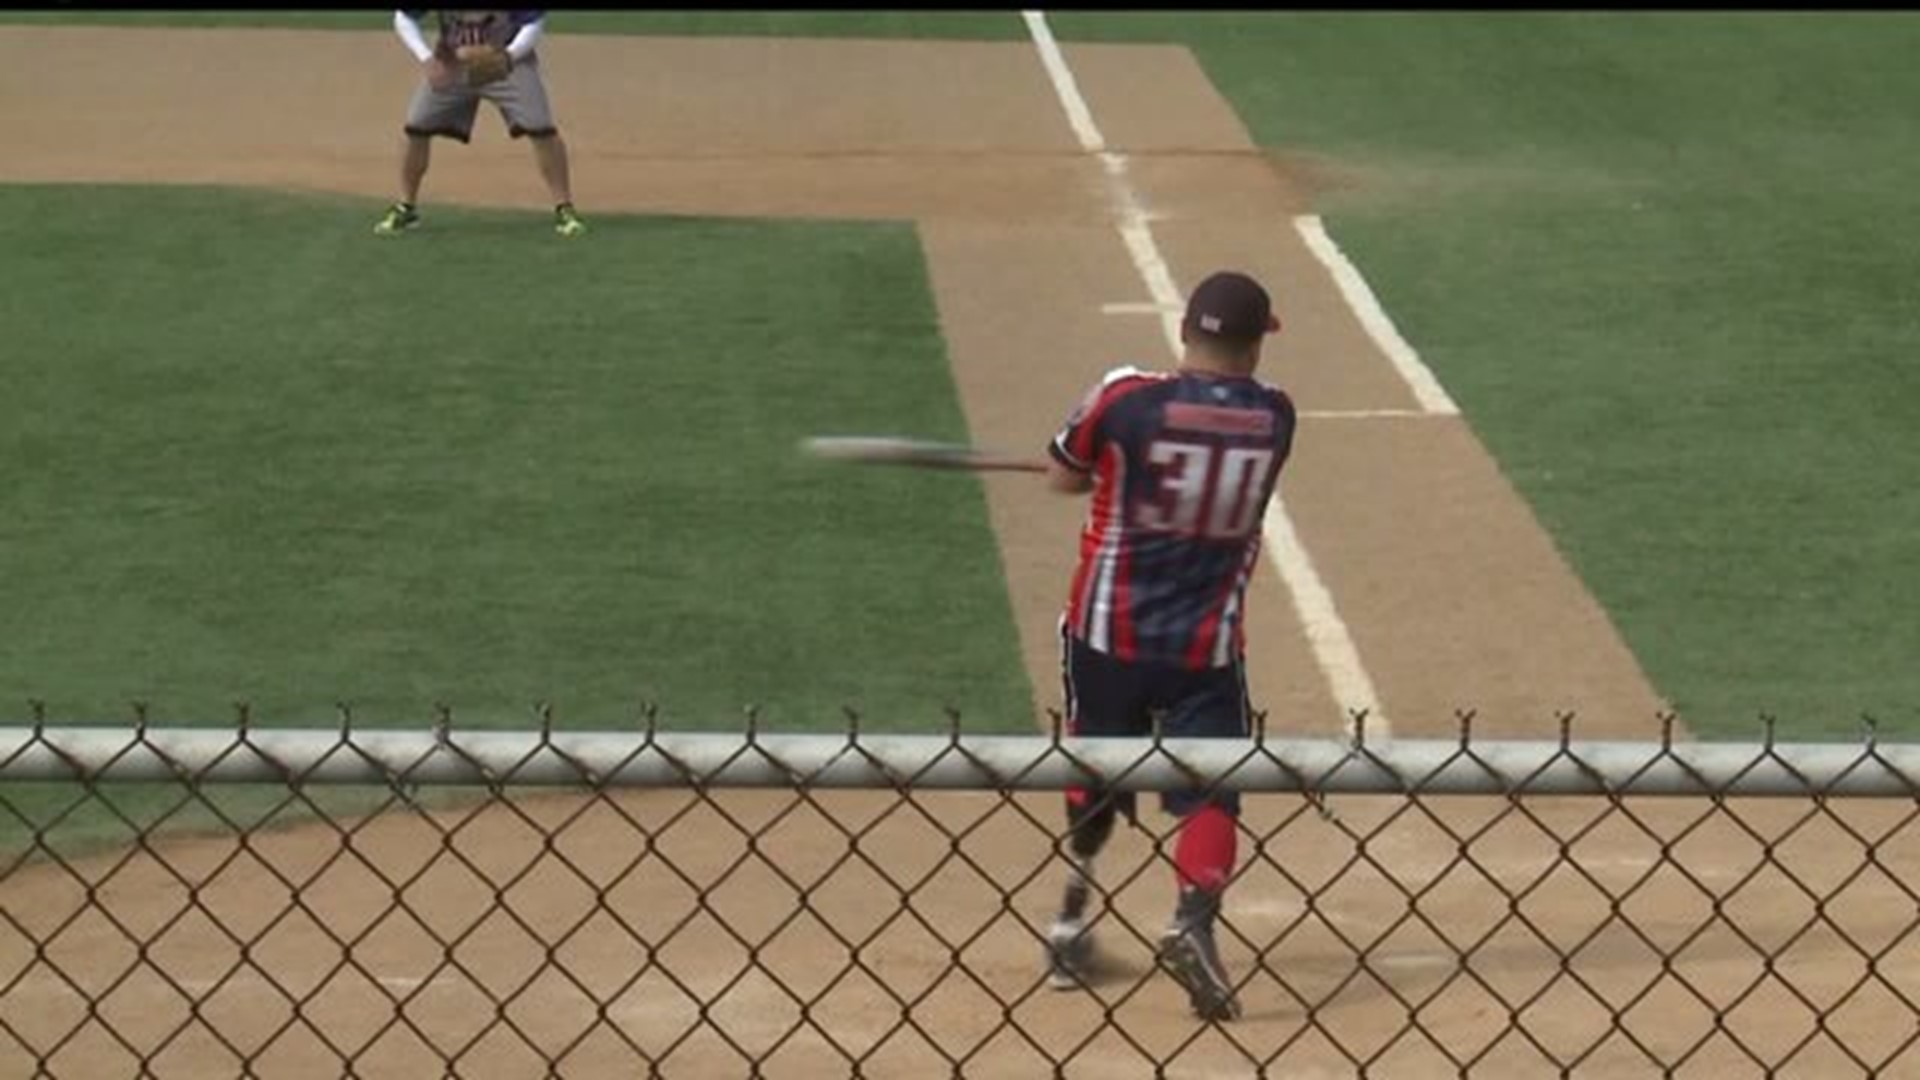 Wounded Warrior Play Baseball at Red Lion High School